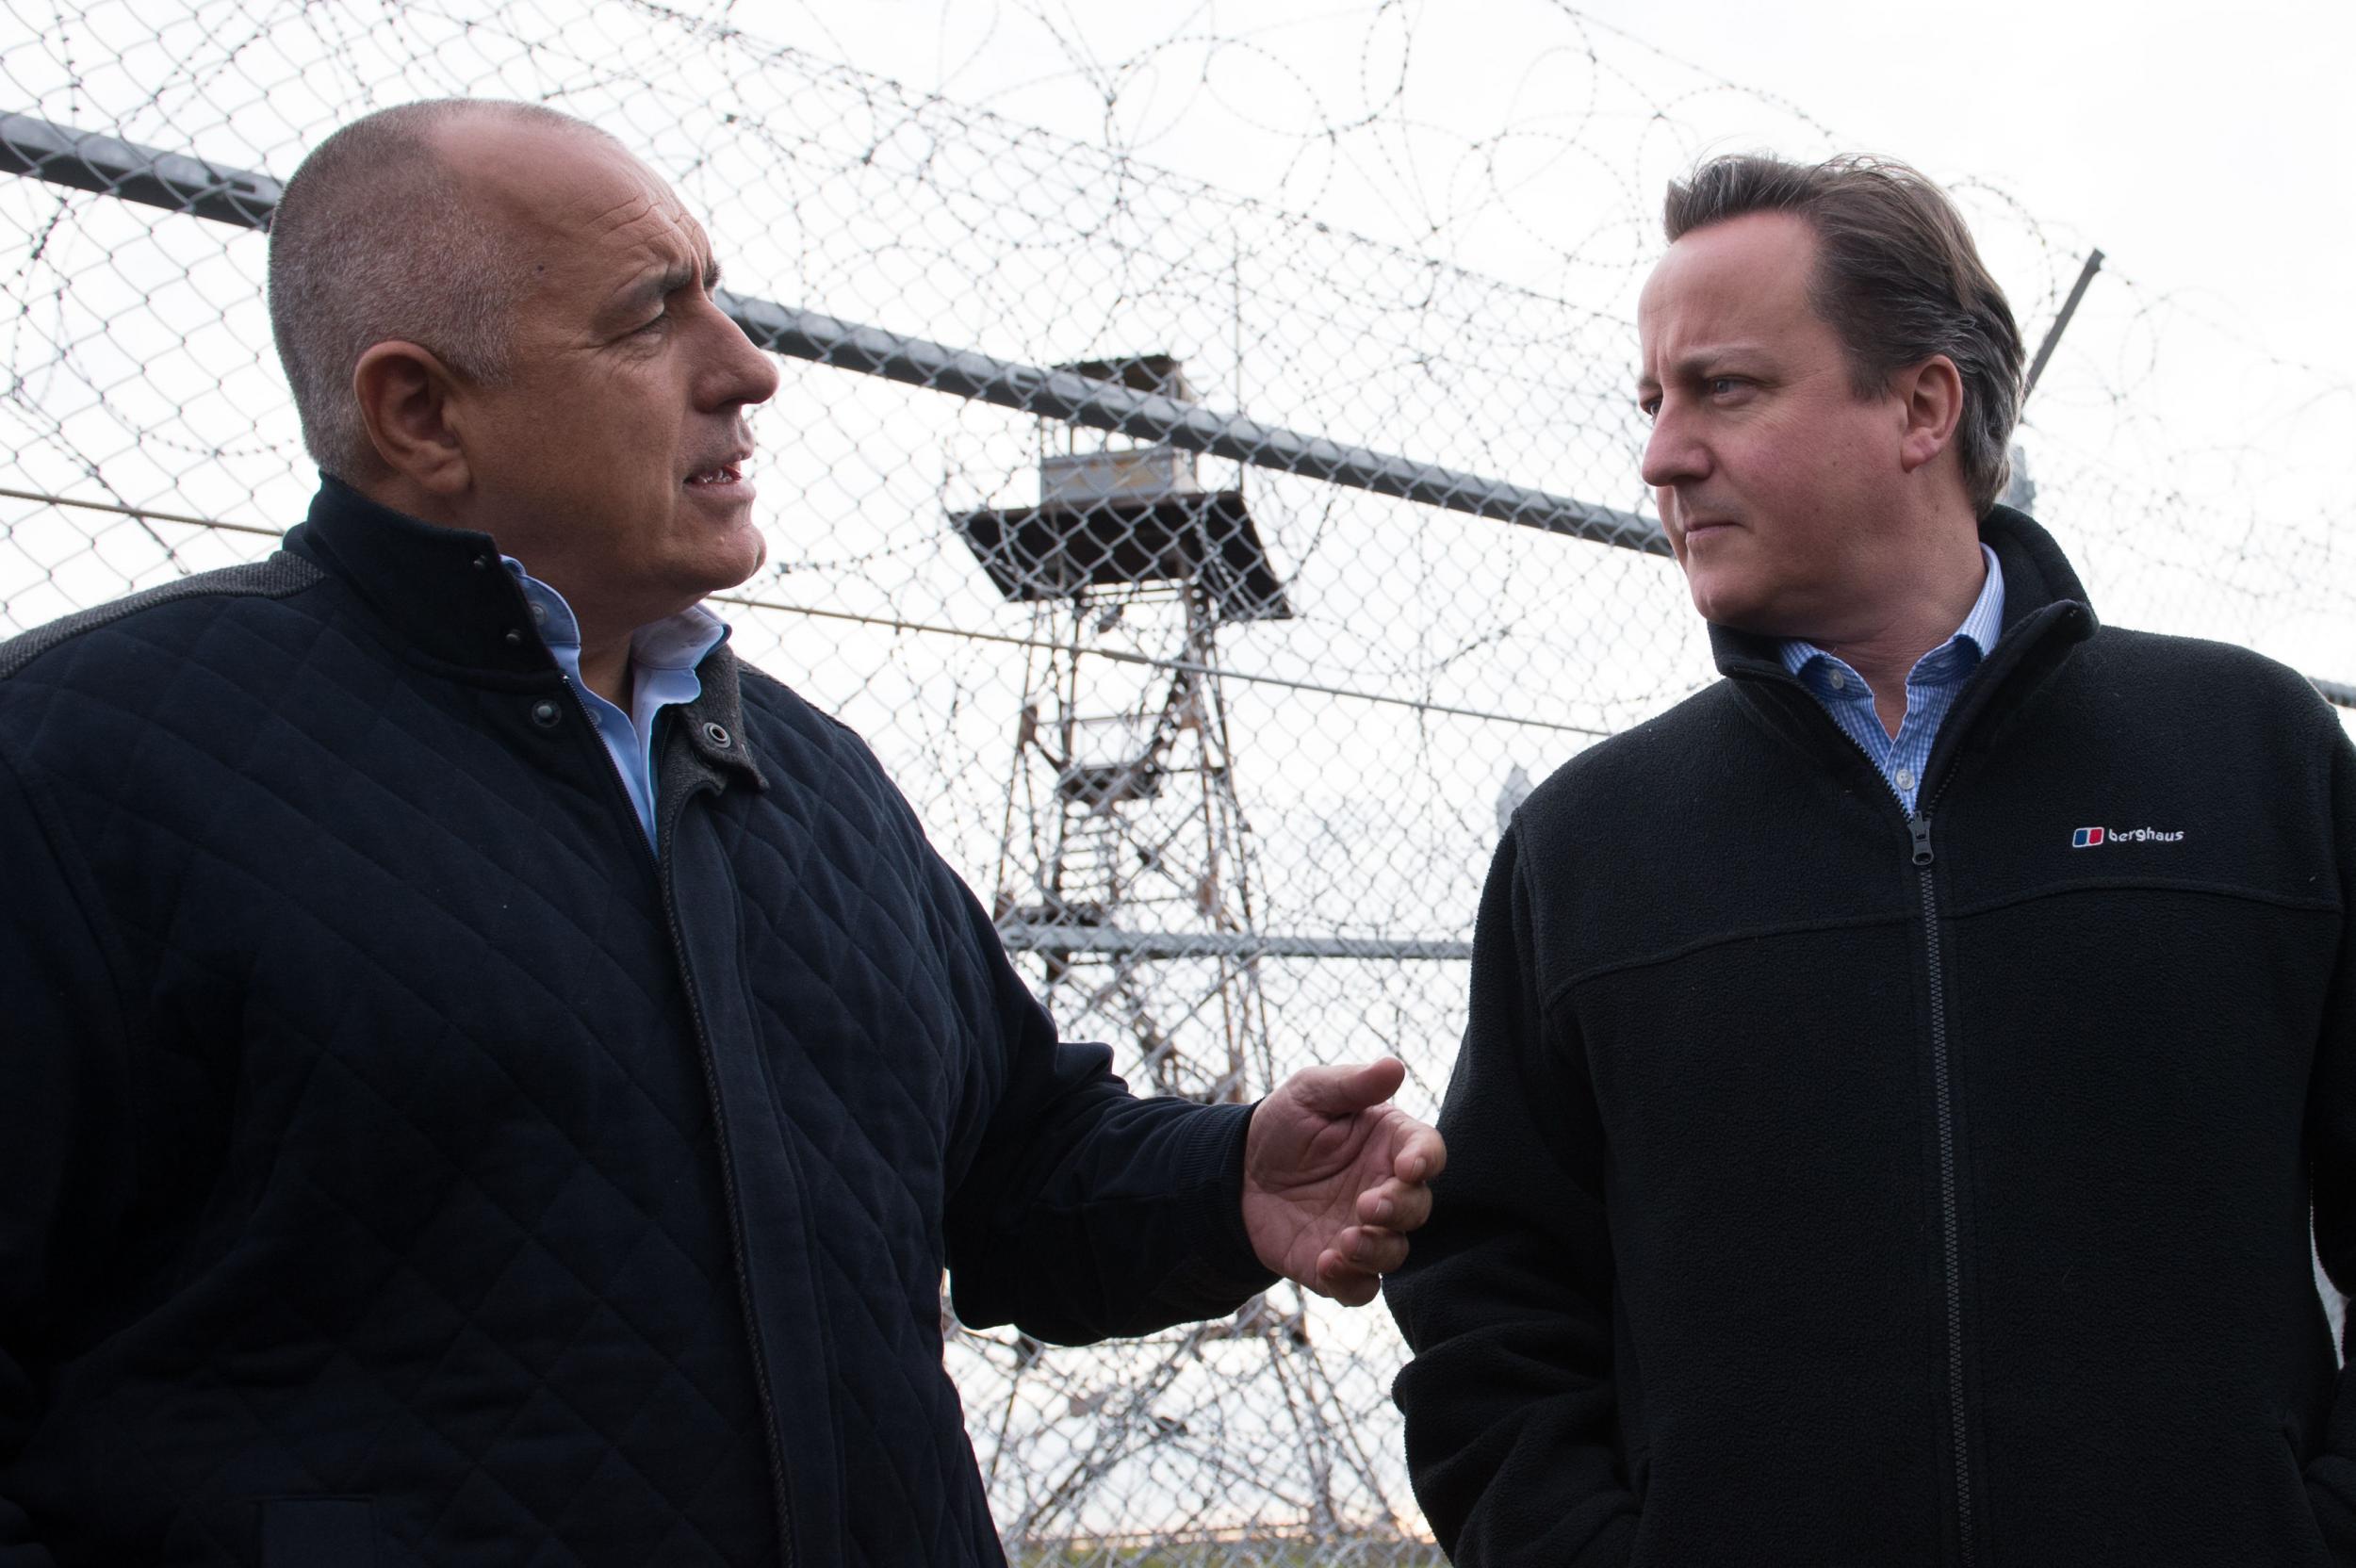 David Cameron and Bulgarian Prime Minister Boyko Borissov visit Bulgaria's border with Turkey near the Lesovo crossing point, where they saw the enhanced efforts to secure the European Union's external frontiers.